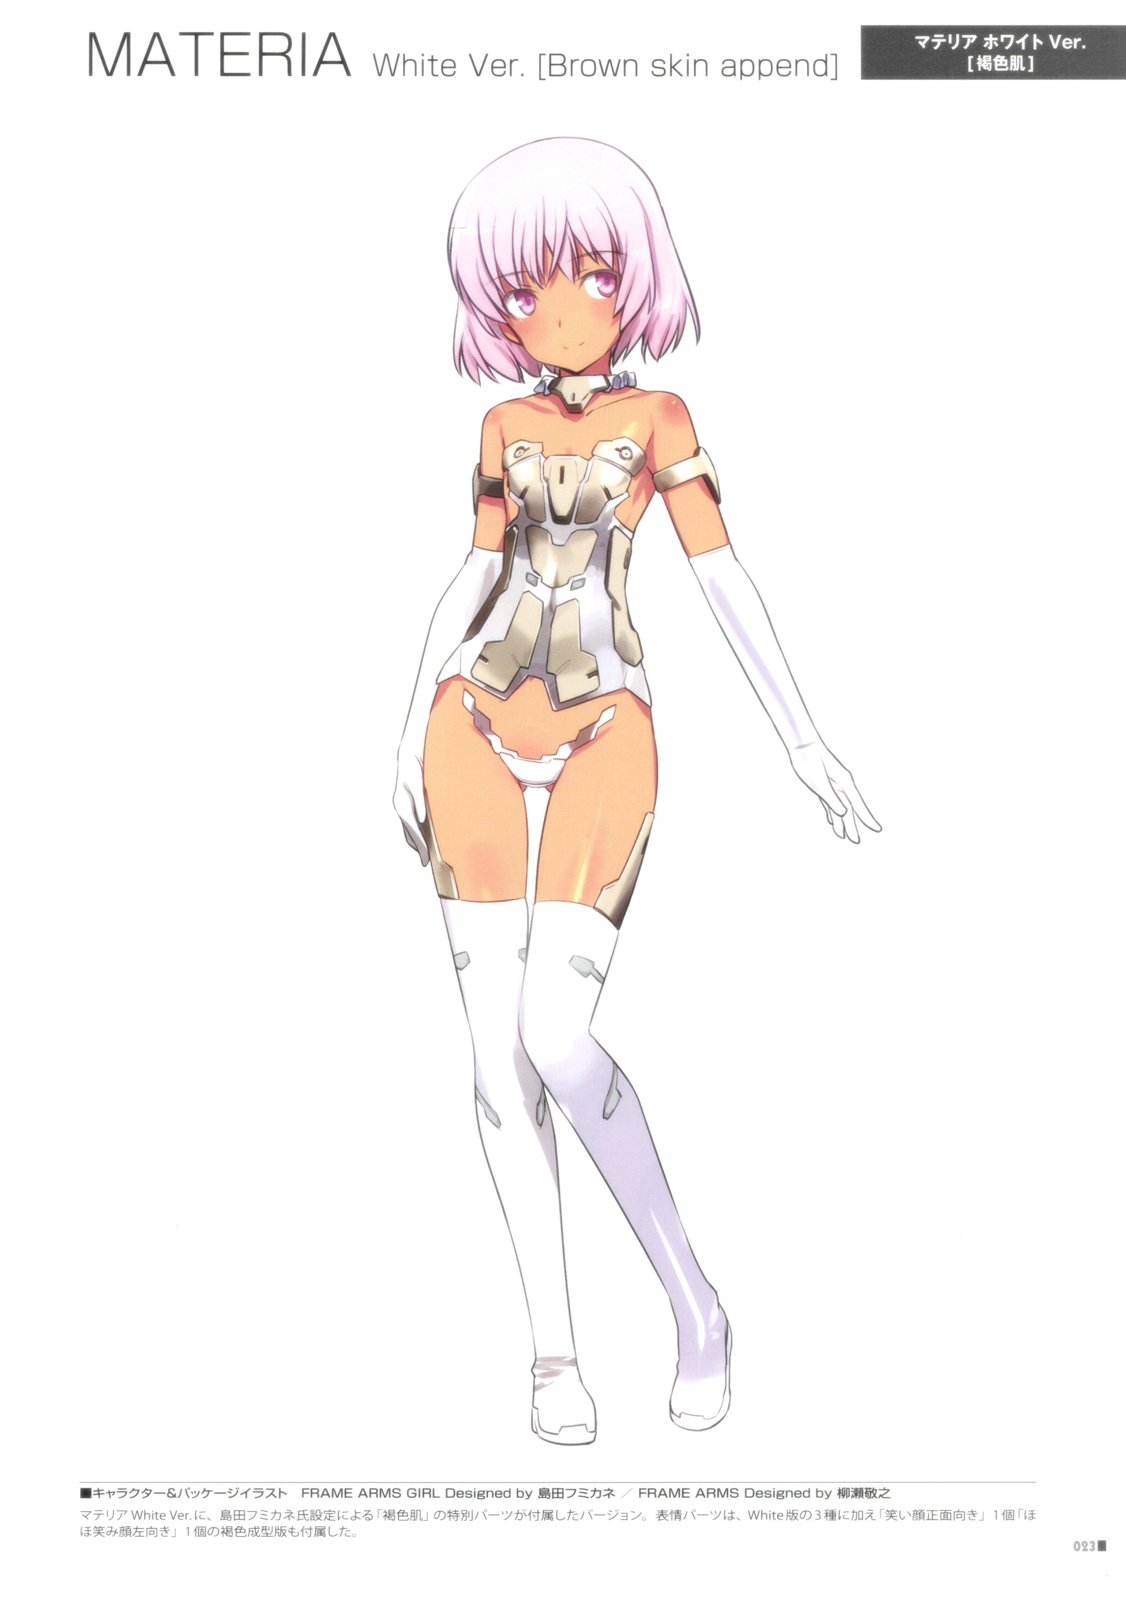 FRAME ARMS GIRL DESIGNERS NOTE - 全一卷(1/5) - 6